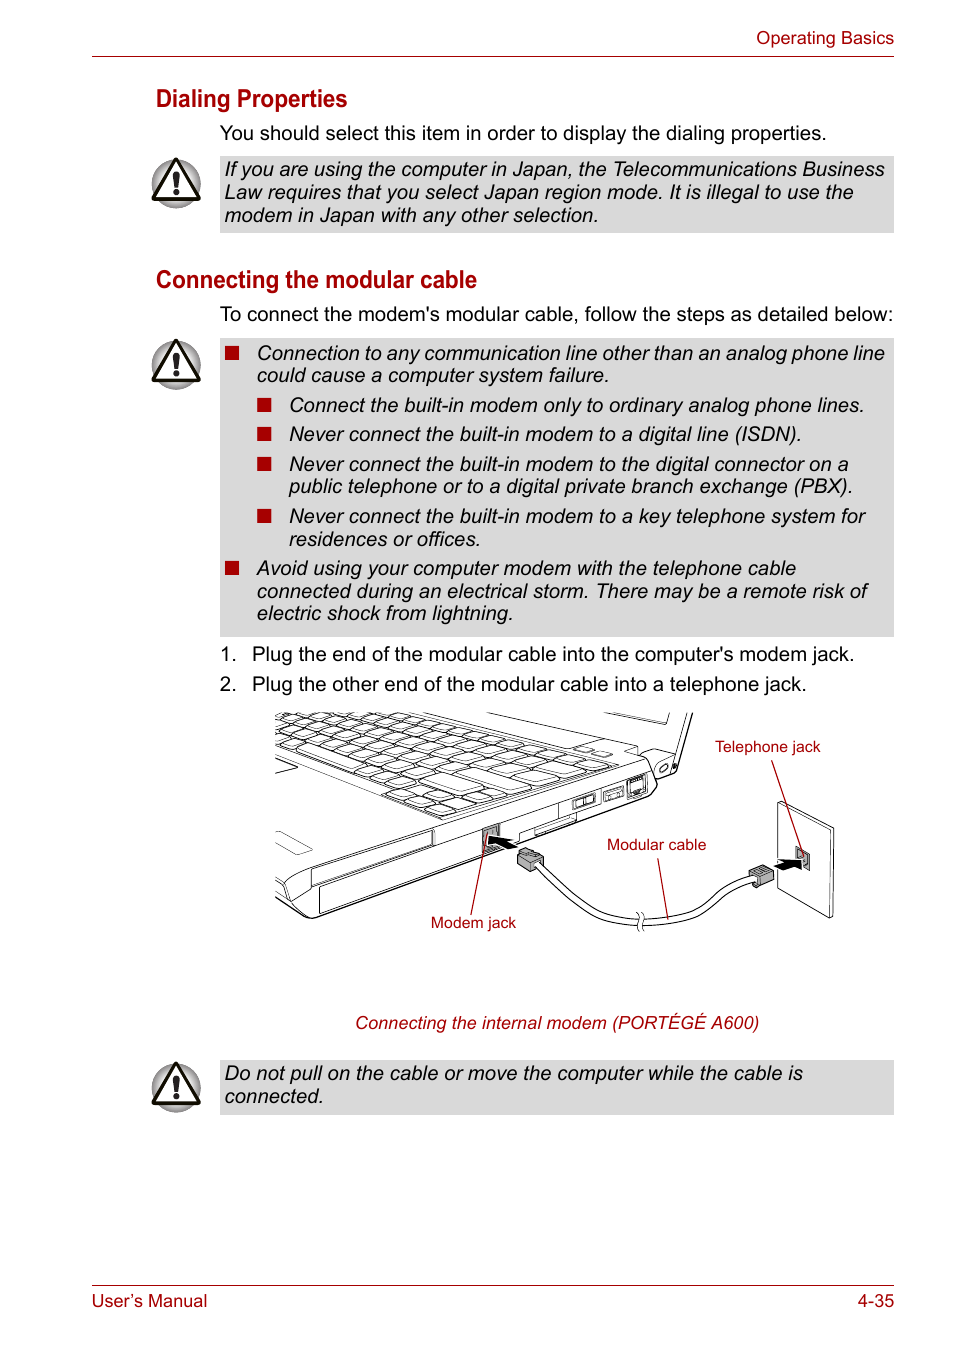 Dialing properties, Connecting the modular cable | Toshiba Portege A600 User Manual | Page 118 / 219